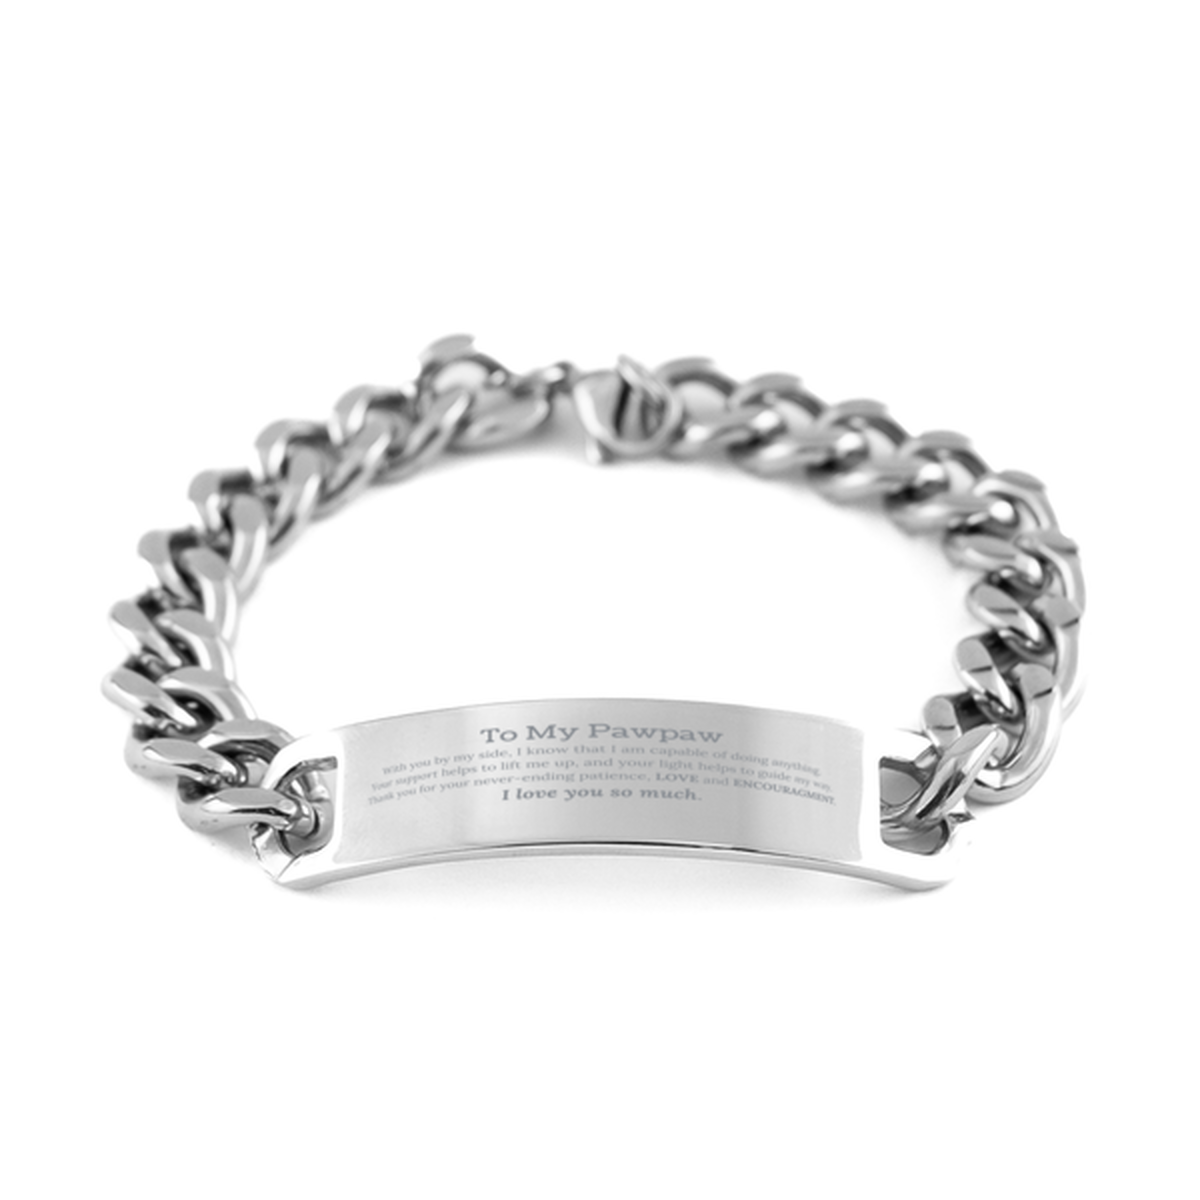 Appreciation Pawpaw Cuban Chain Stainless Steel Bracelet Gifts, To My Pawpaw Birthday Christmas Wedding Keepsake Gifts for Pawpaw With you by my side, I know that I am capable of doing anything. I love you so much